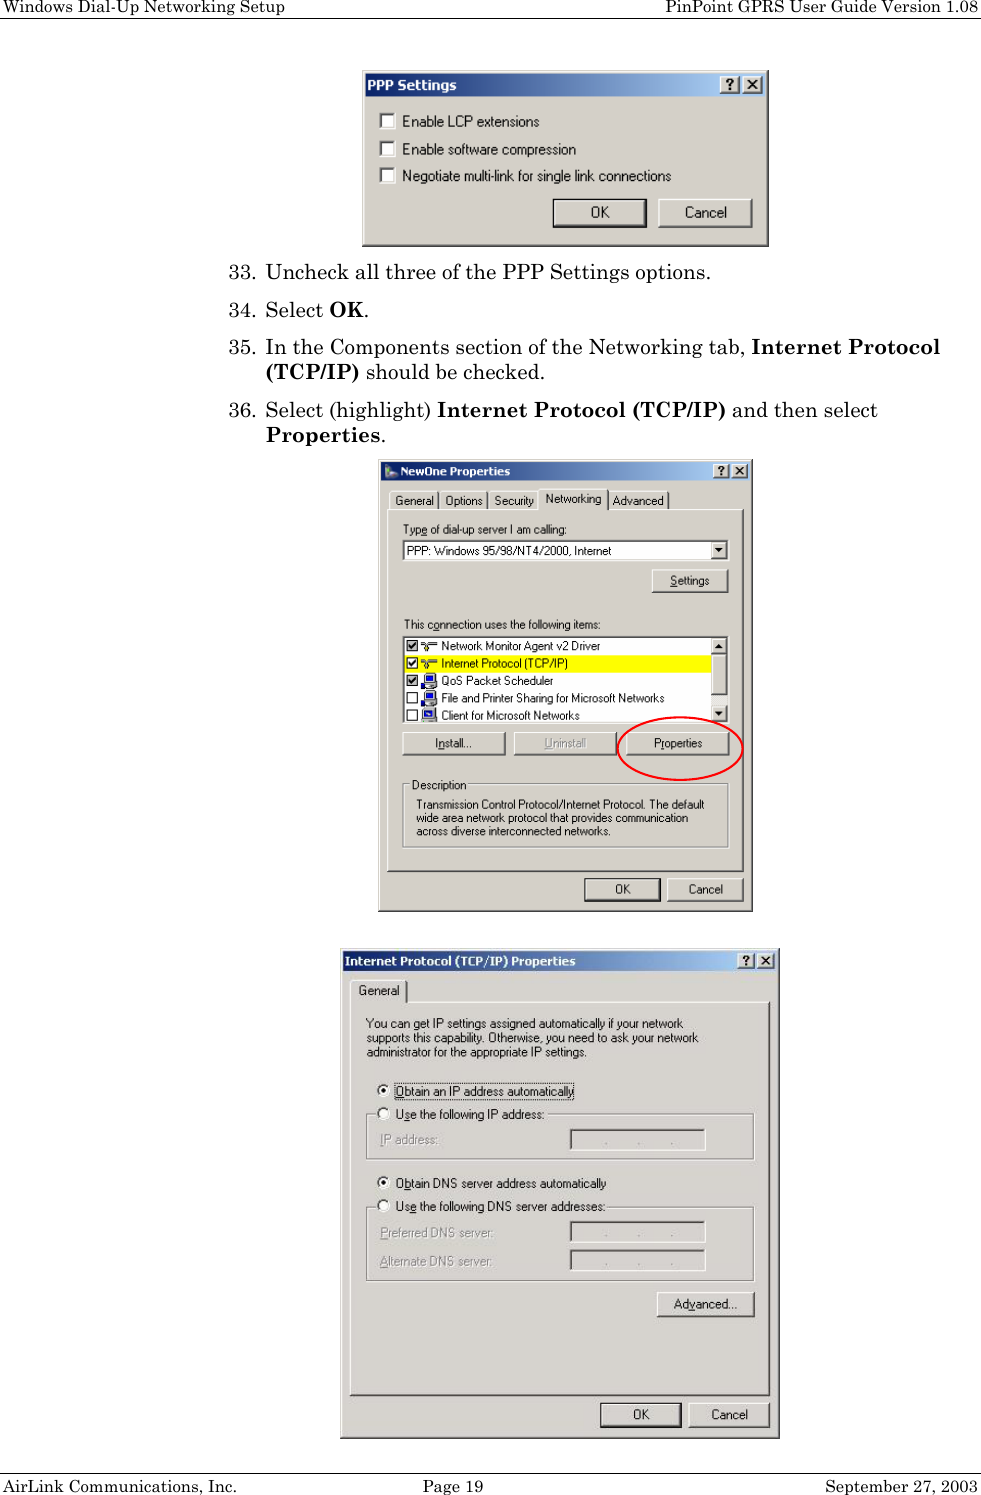 Windows Dial-Up Networking Setup    PinPoint GPRS User Guide Version 1.08 AirLink Communications, Inc.  Page 19  September 27, 2003  33. Uncheck all three of the PPP Settings options. 34. Select OK. 35. In the Components section of the Networking tab, Internet Protocol (TCP/IP) should be checked. 36. Select (highlight) Internet Protocol (TCP/IP) and then select Properties.         